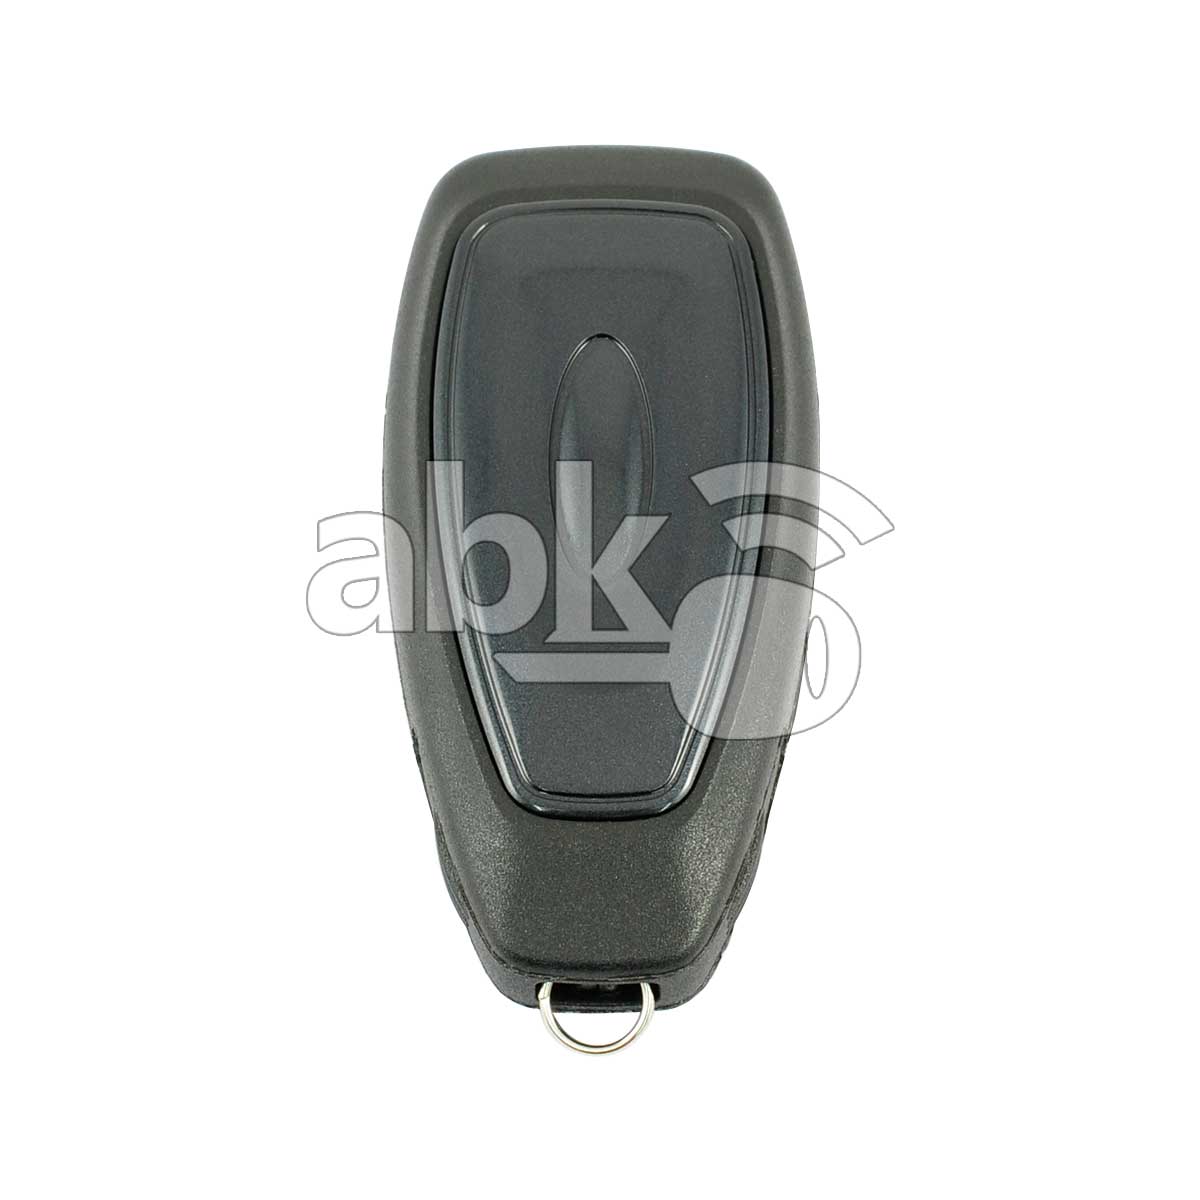 Ford Focus C-Max 2015+ Smart Key 3Buttons 2178773 1925235 2027592 433MHz KR5876268 - ABK-2401 -